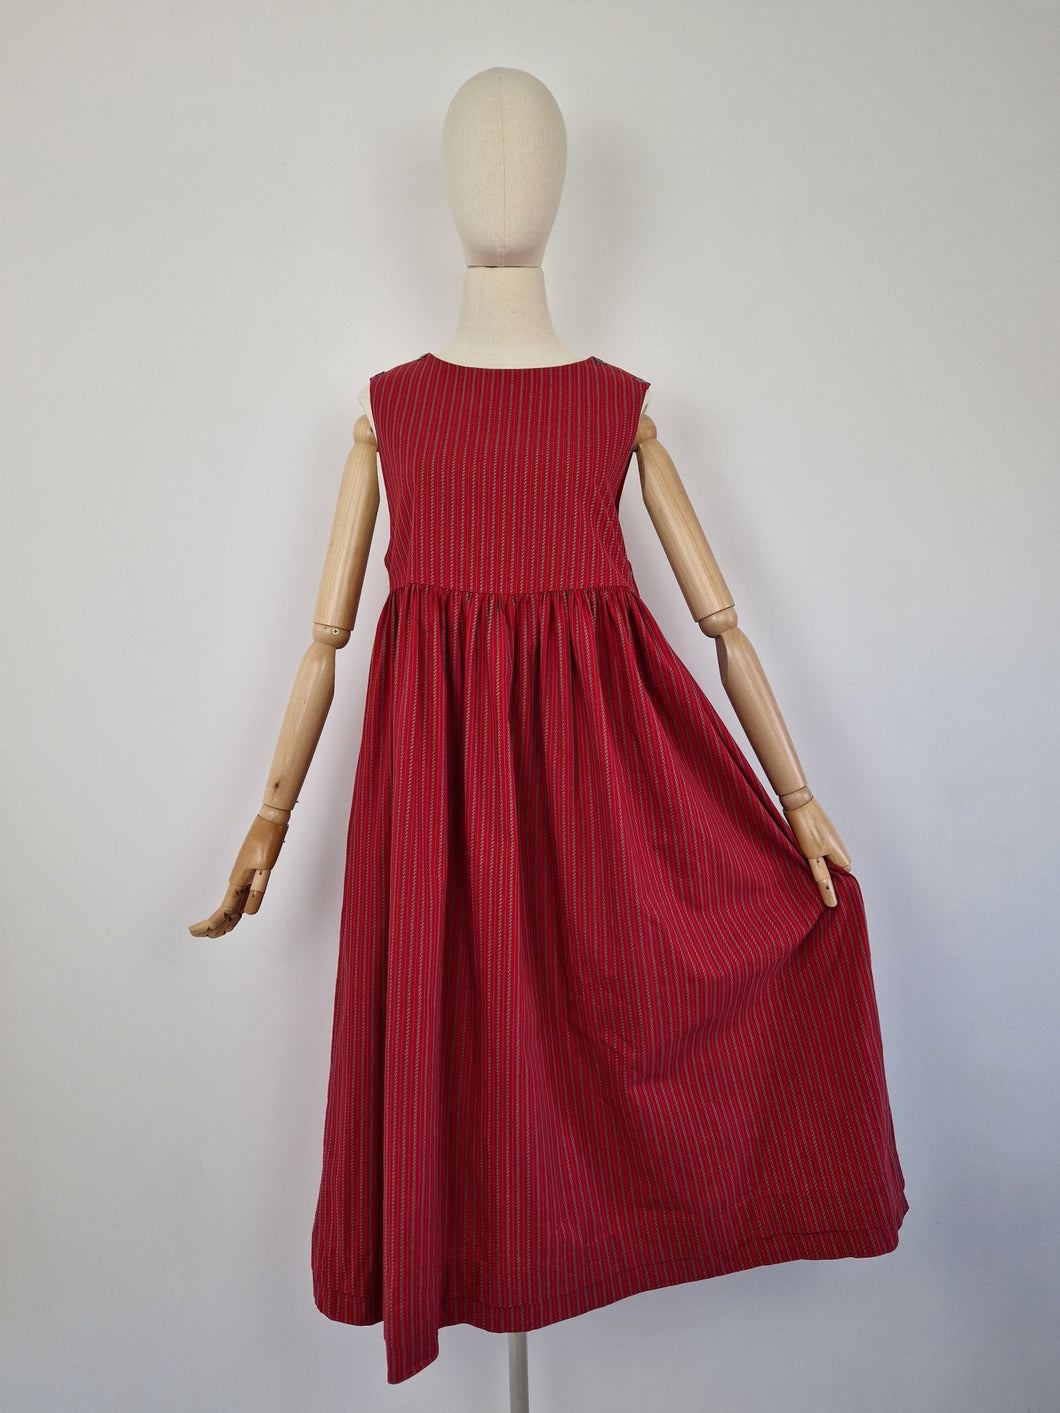 Vintage 80s Laura Ashley red pinafore dress